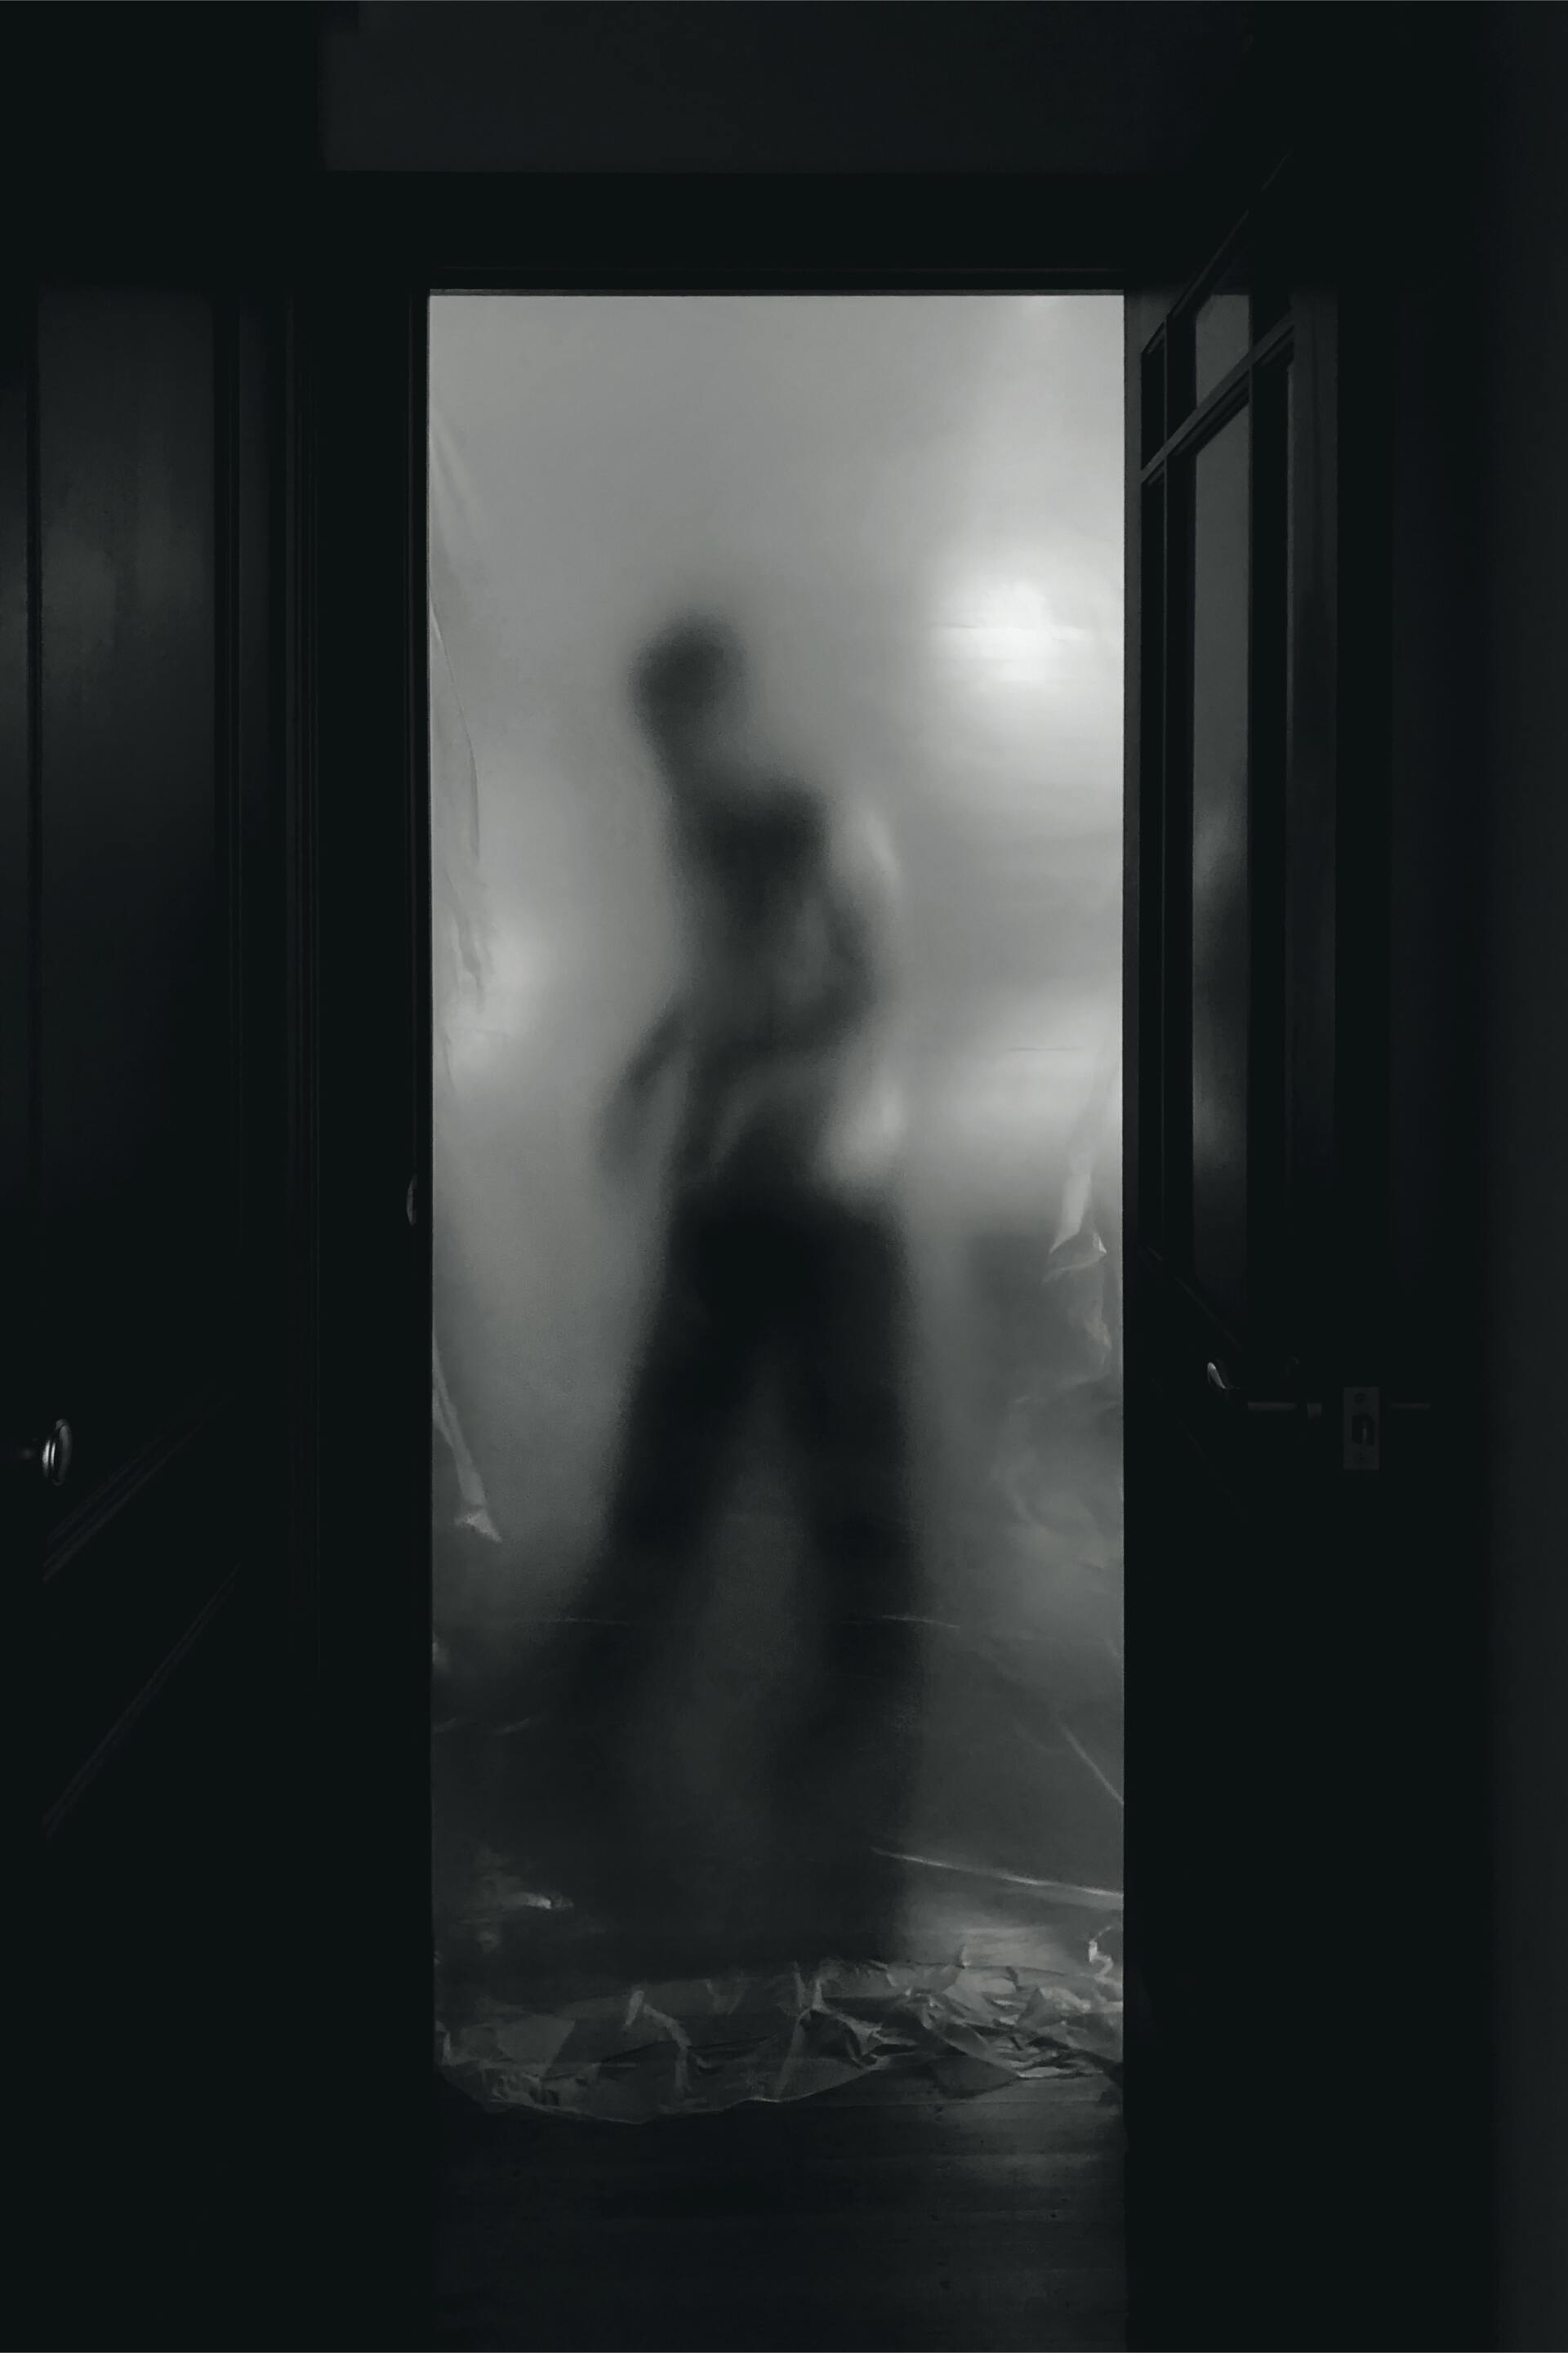 A silhouette of a person standing in a doorway in a dark room.